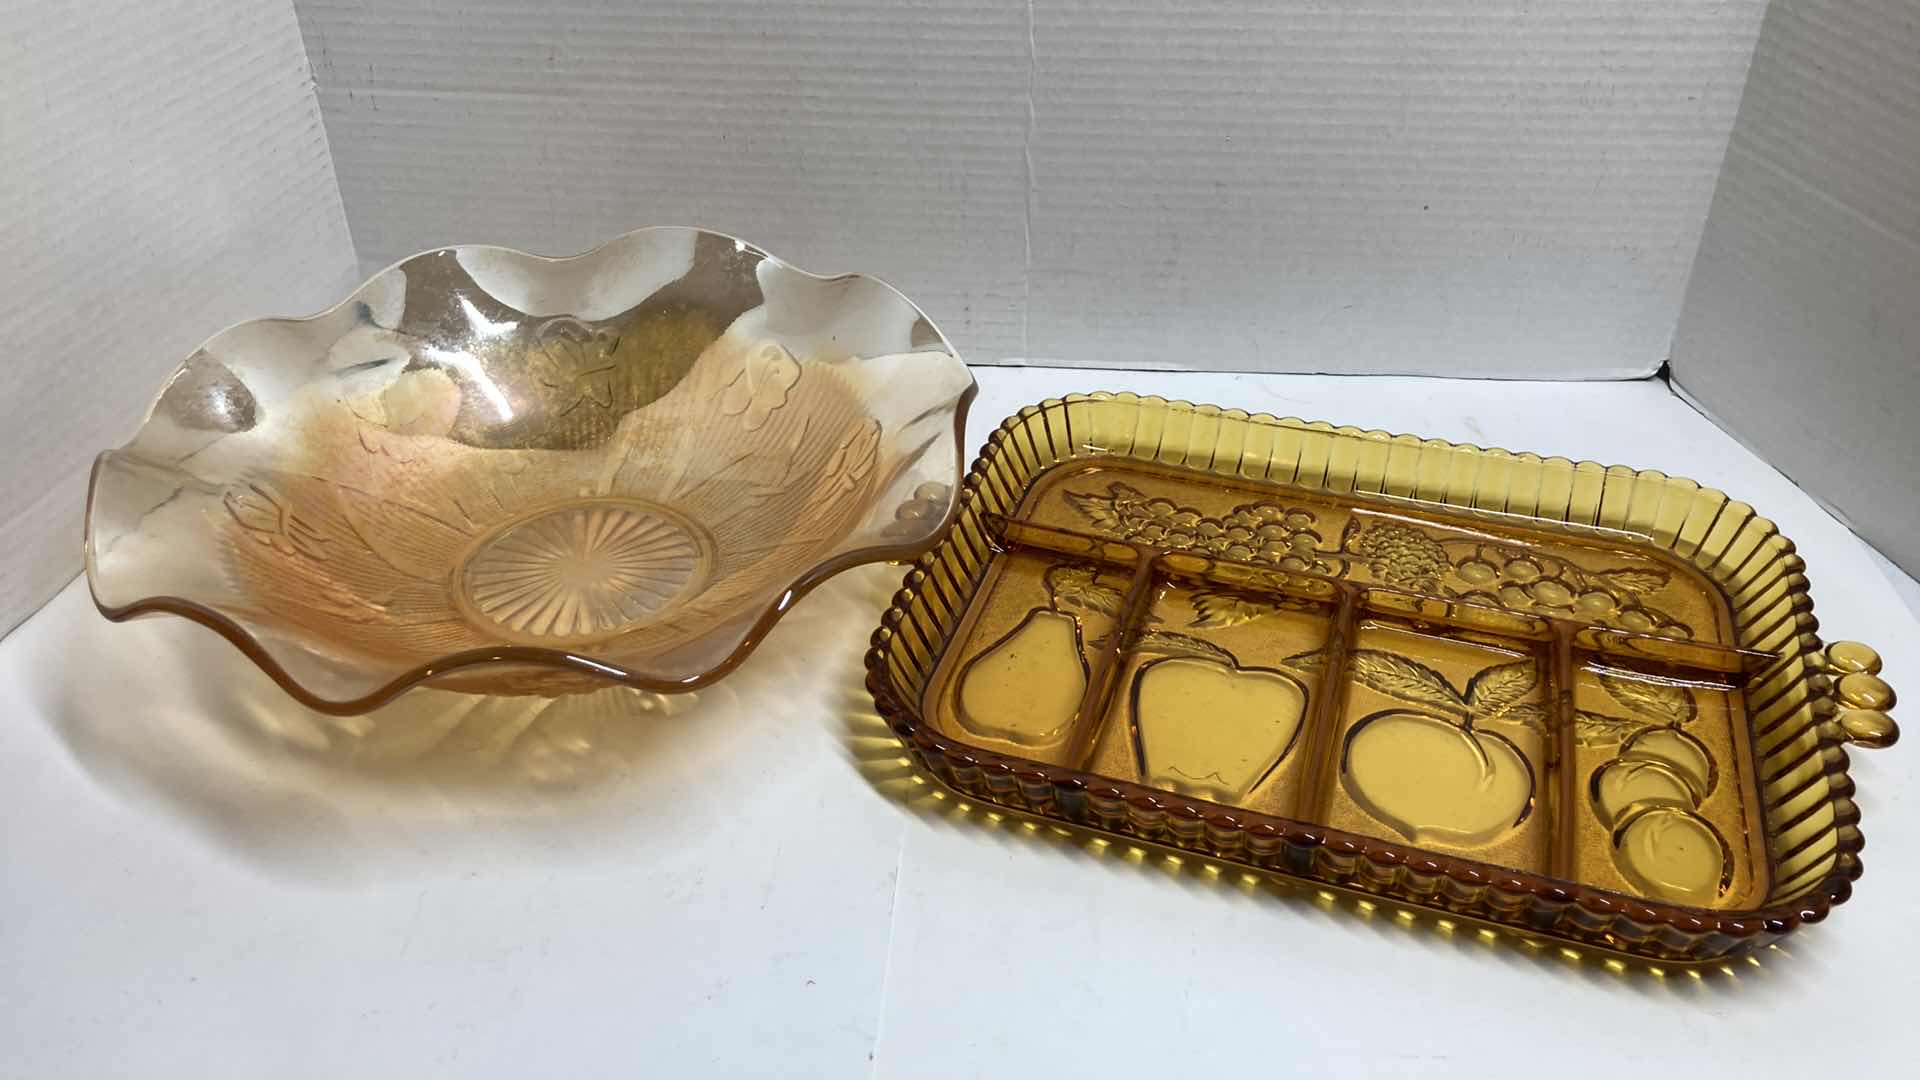 Photo 1 of VINTAGE 11.5” MARIGOLD RUFFLED EDGE CARNIVAL GLASS BOWL & INDIANA AMBER GLASS CONDIMENT TRAY 12.5” X 8.5”